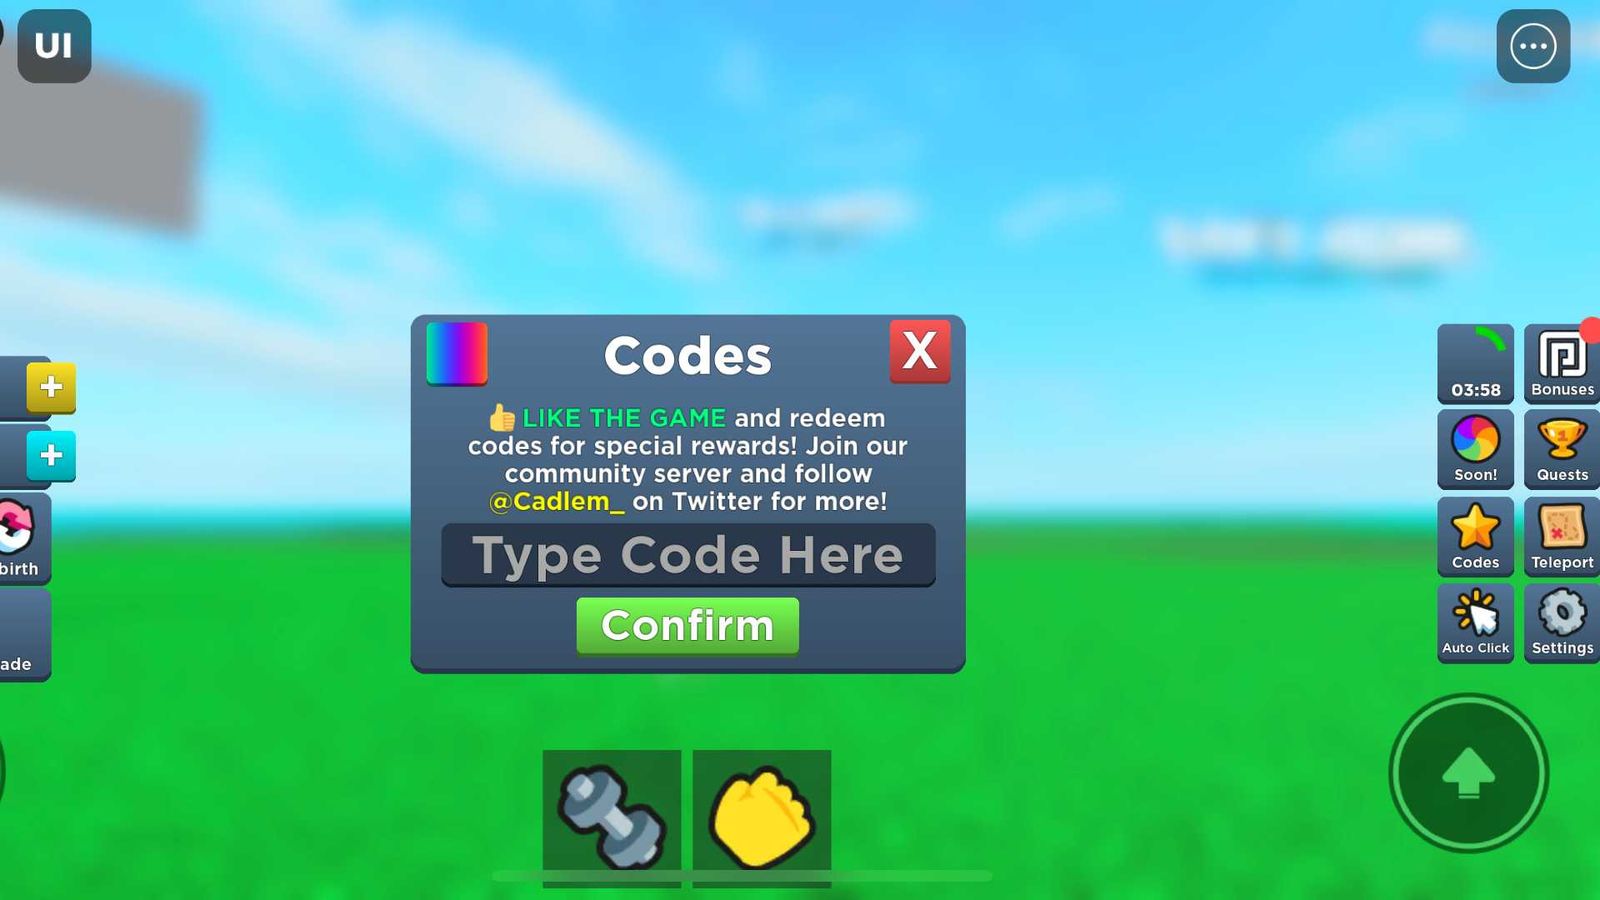 The code redemption screen in Training Simulator.